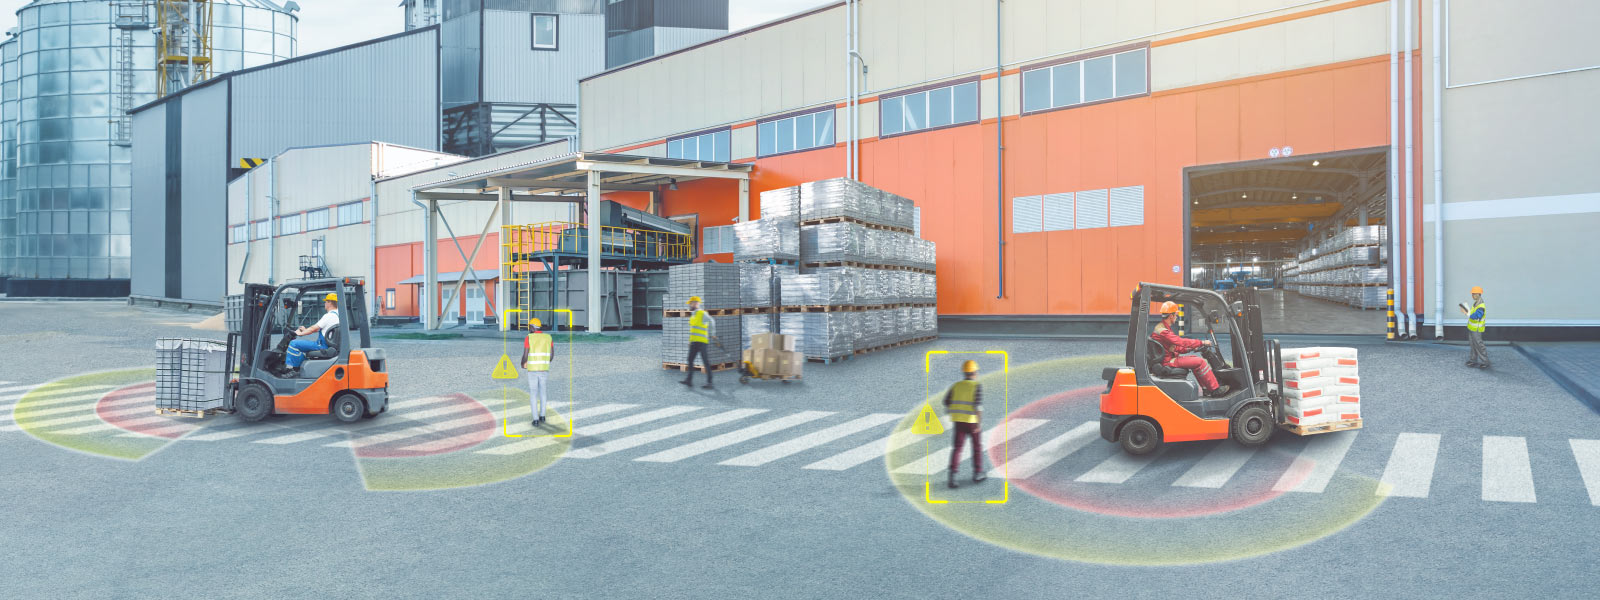 Adding the VIA Mobile360 FSS to increase Warehouse and Factory Safety